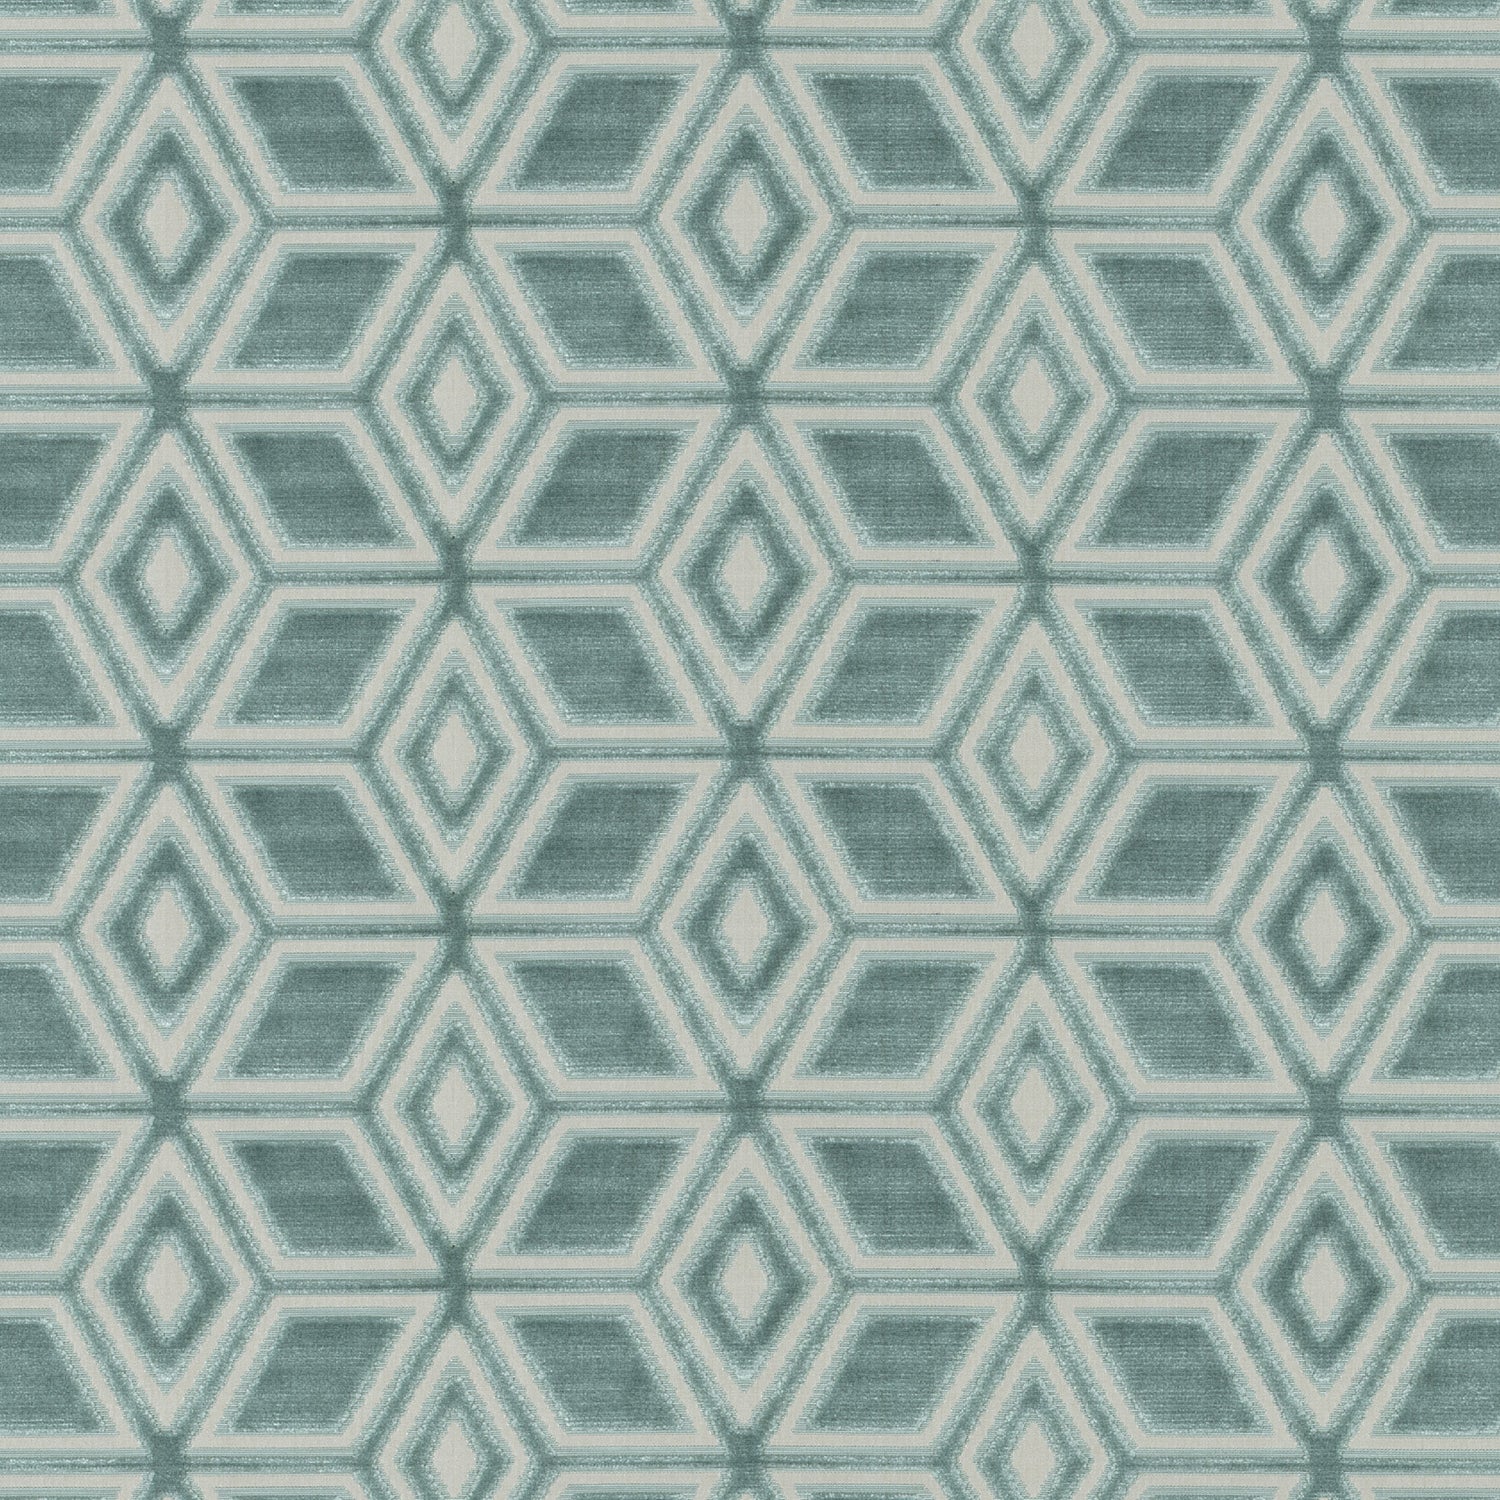 Jardin Maze fabric in aqua color - pattern number AW72983 - by Anna French in the Manor collection